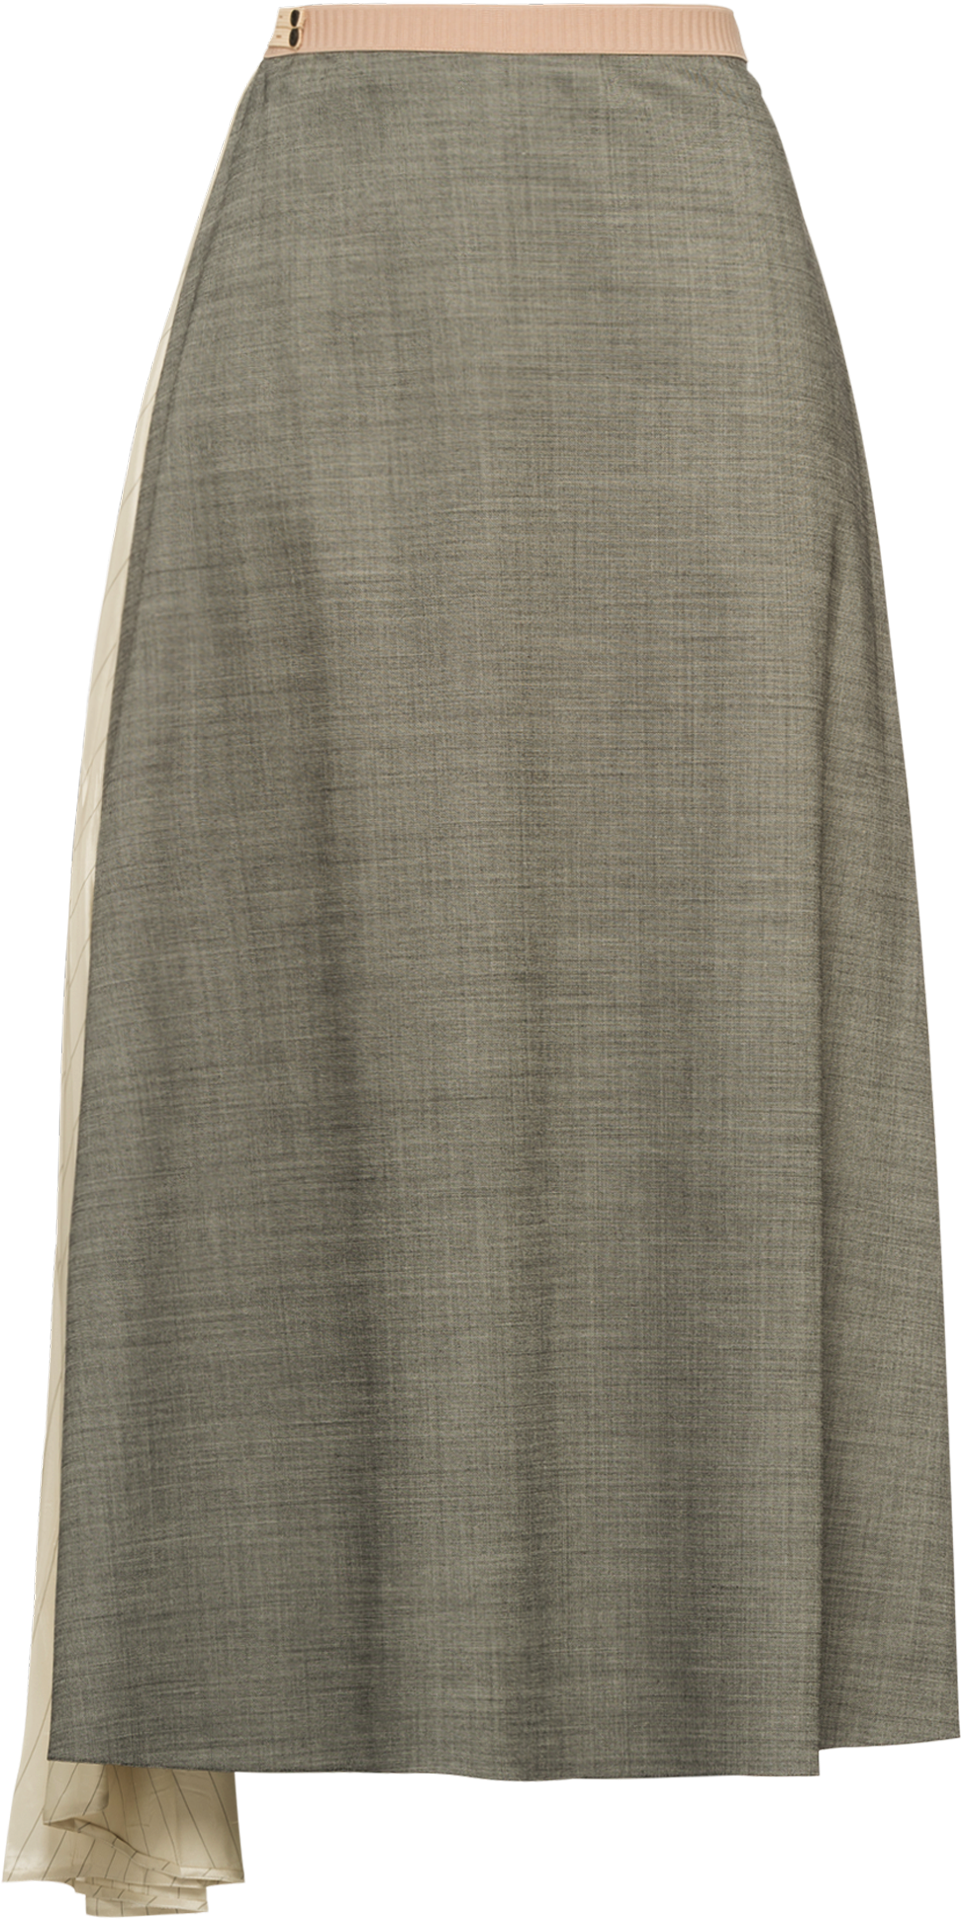 Olive Green Skirt Fabric Texture PNG